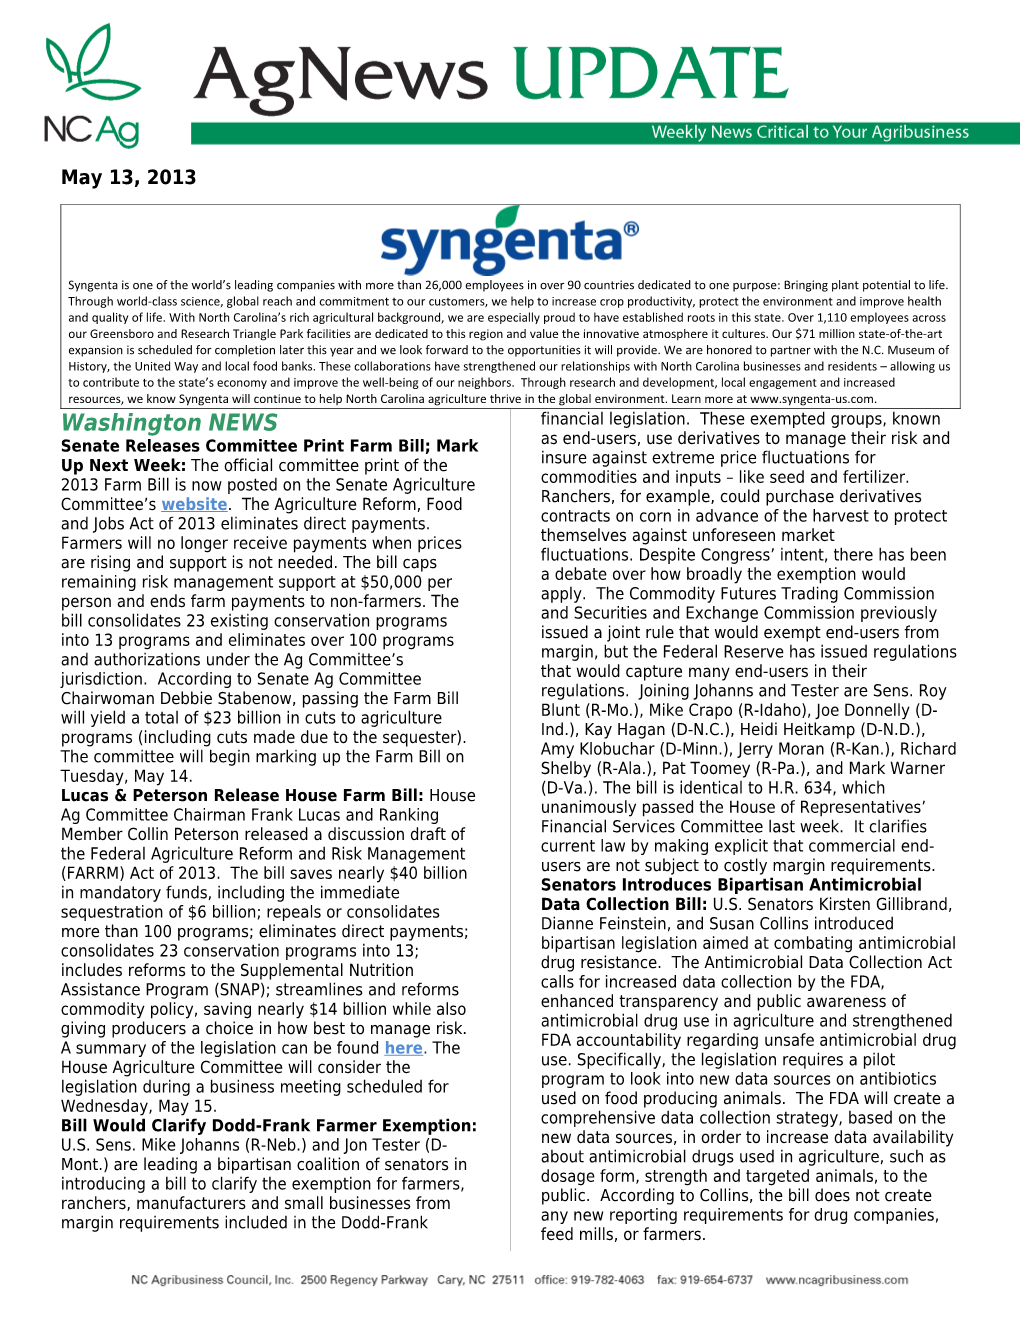 Syngenta Is One of the World S Leading Companies with More Than 26,000 Employees in Over